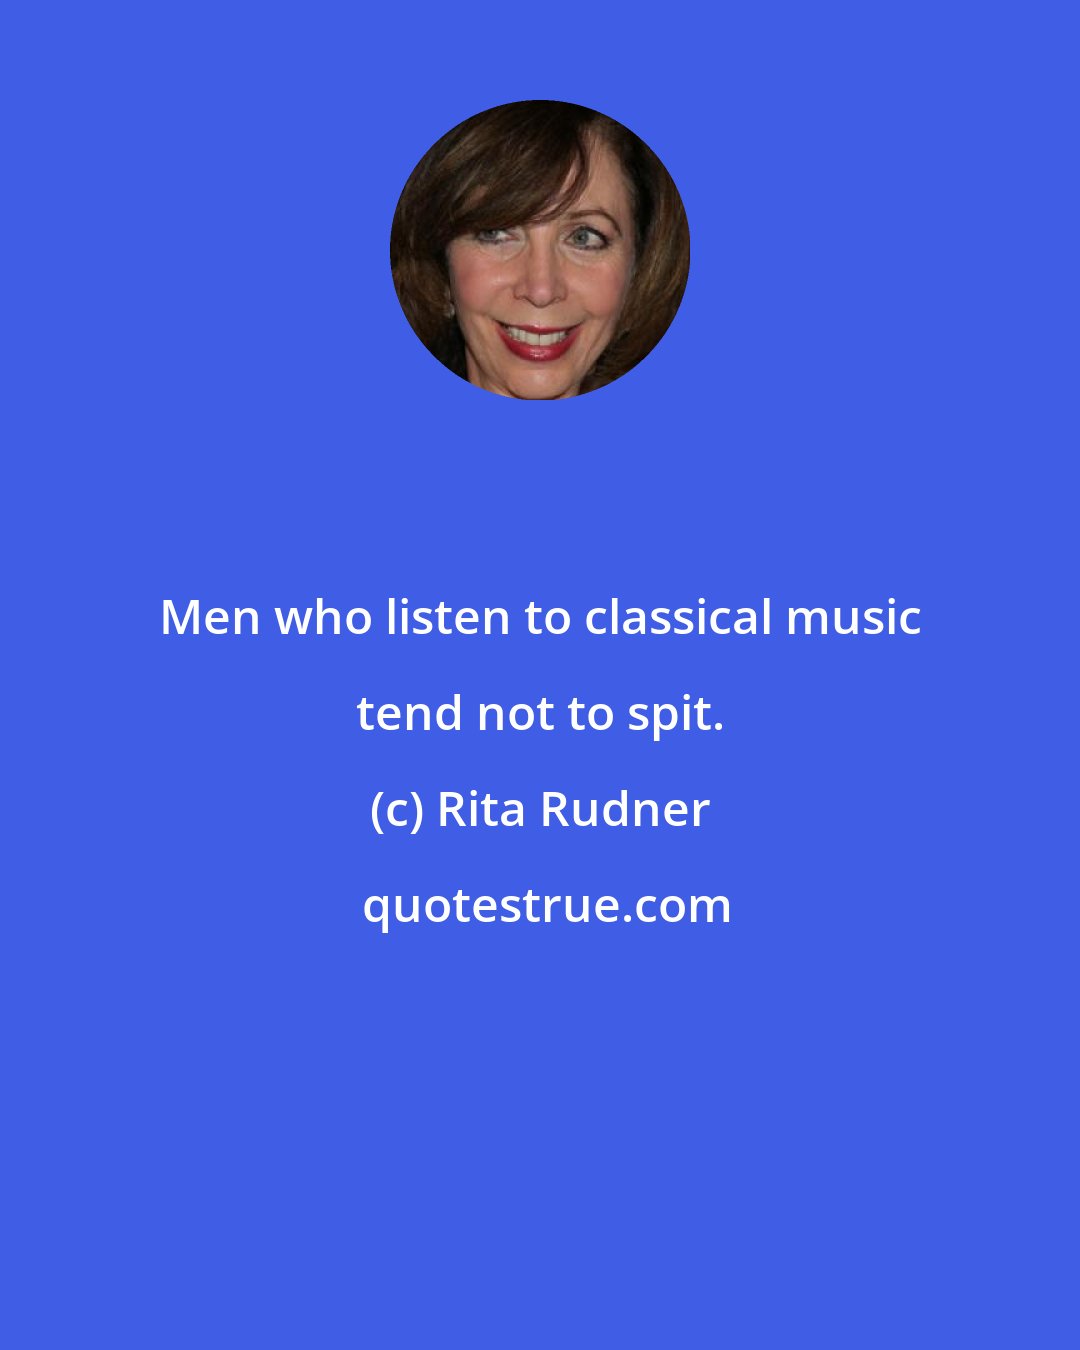 Rita Rudner: Men who listen to classical music tend not to spit.